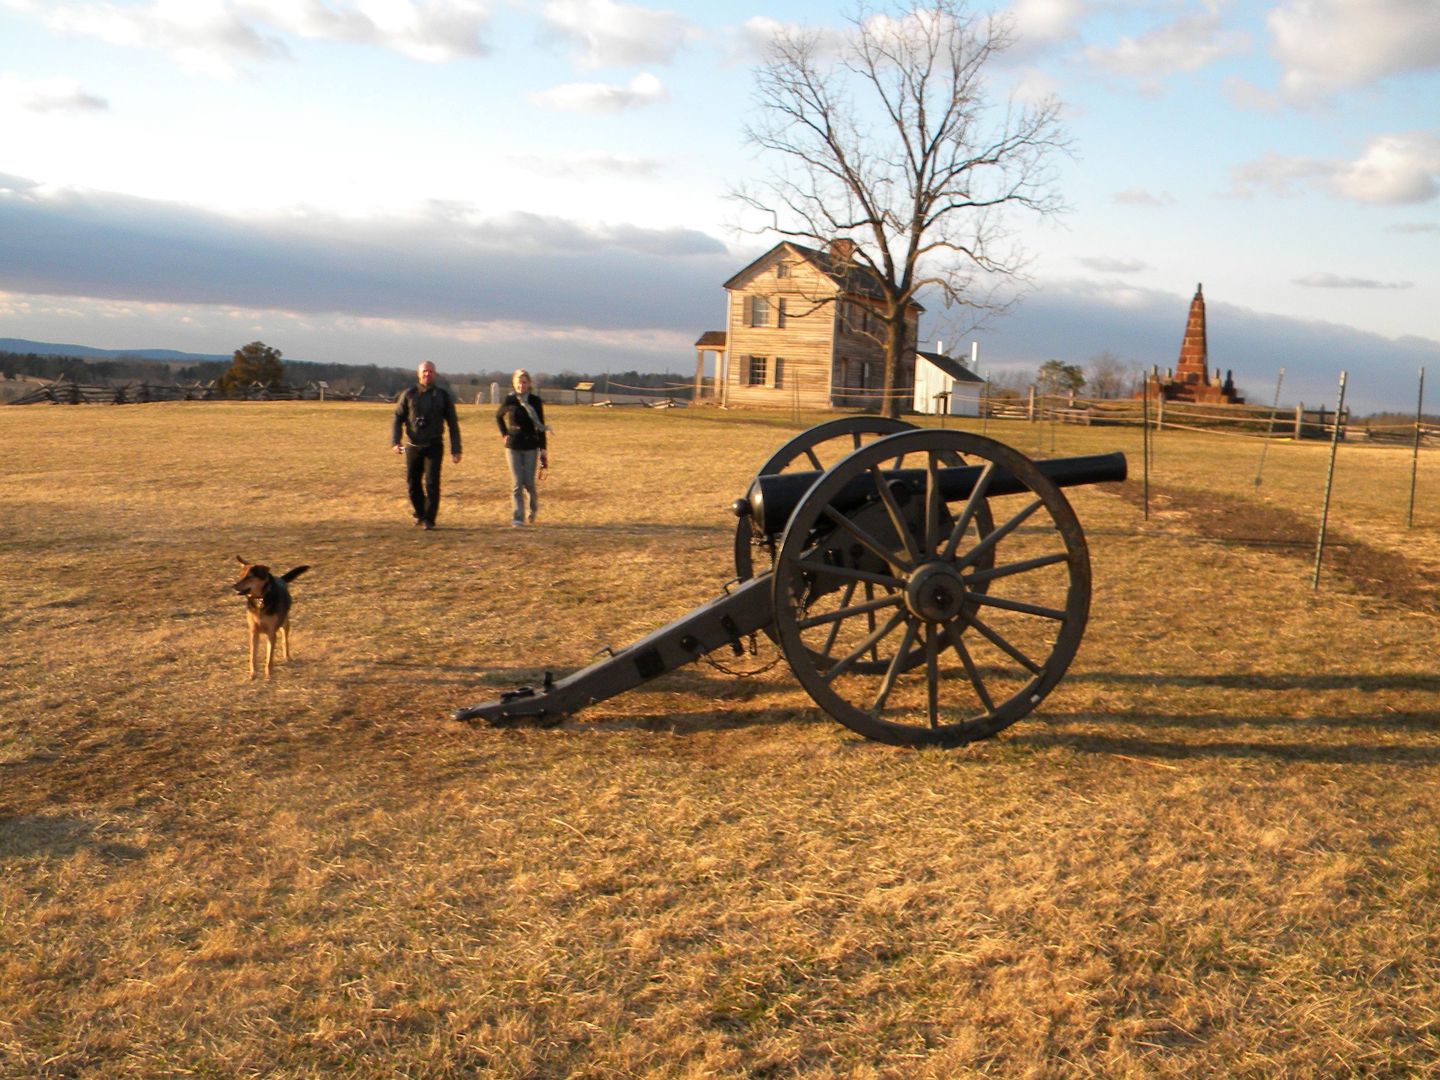 Plan to build data centers next to Manassas National Battlefield Park sparks protests